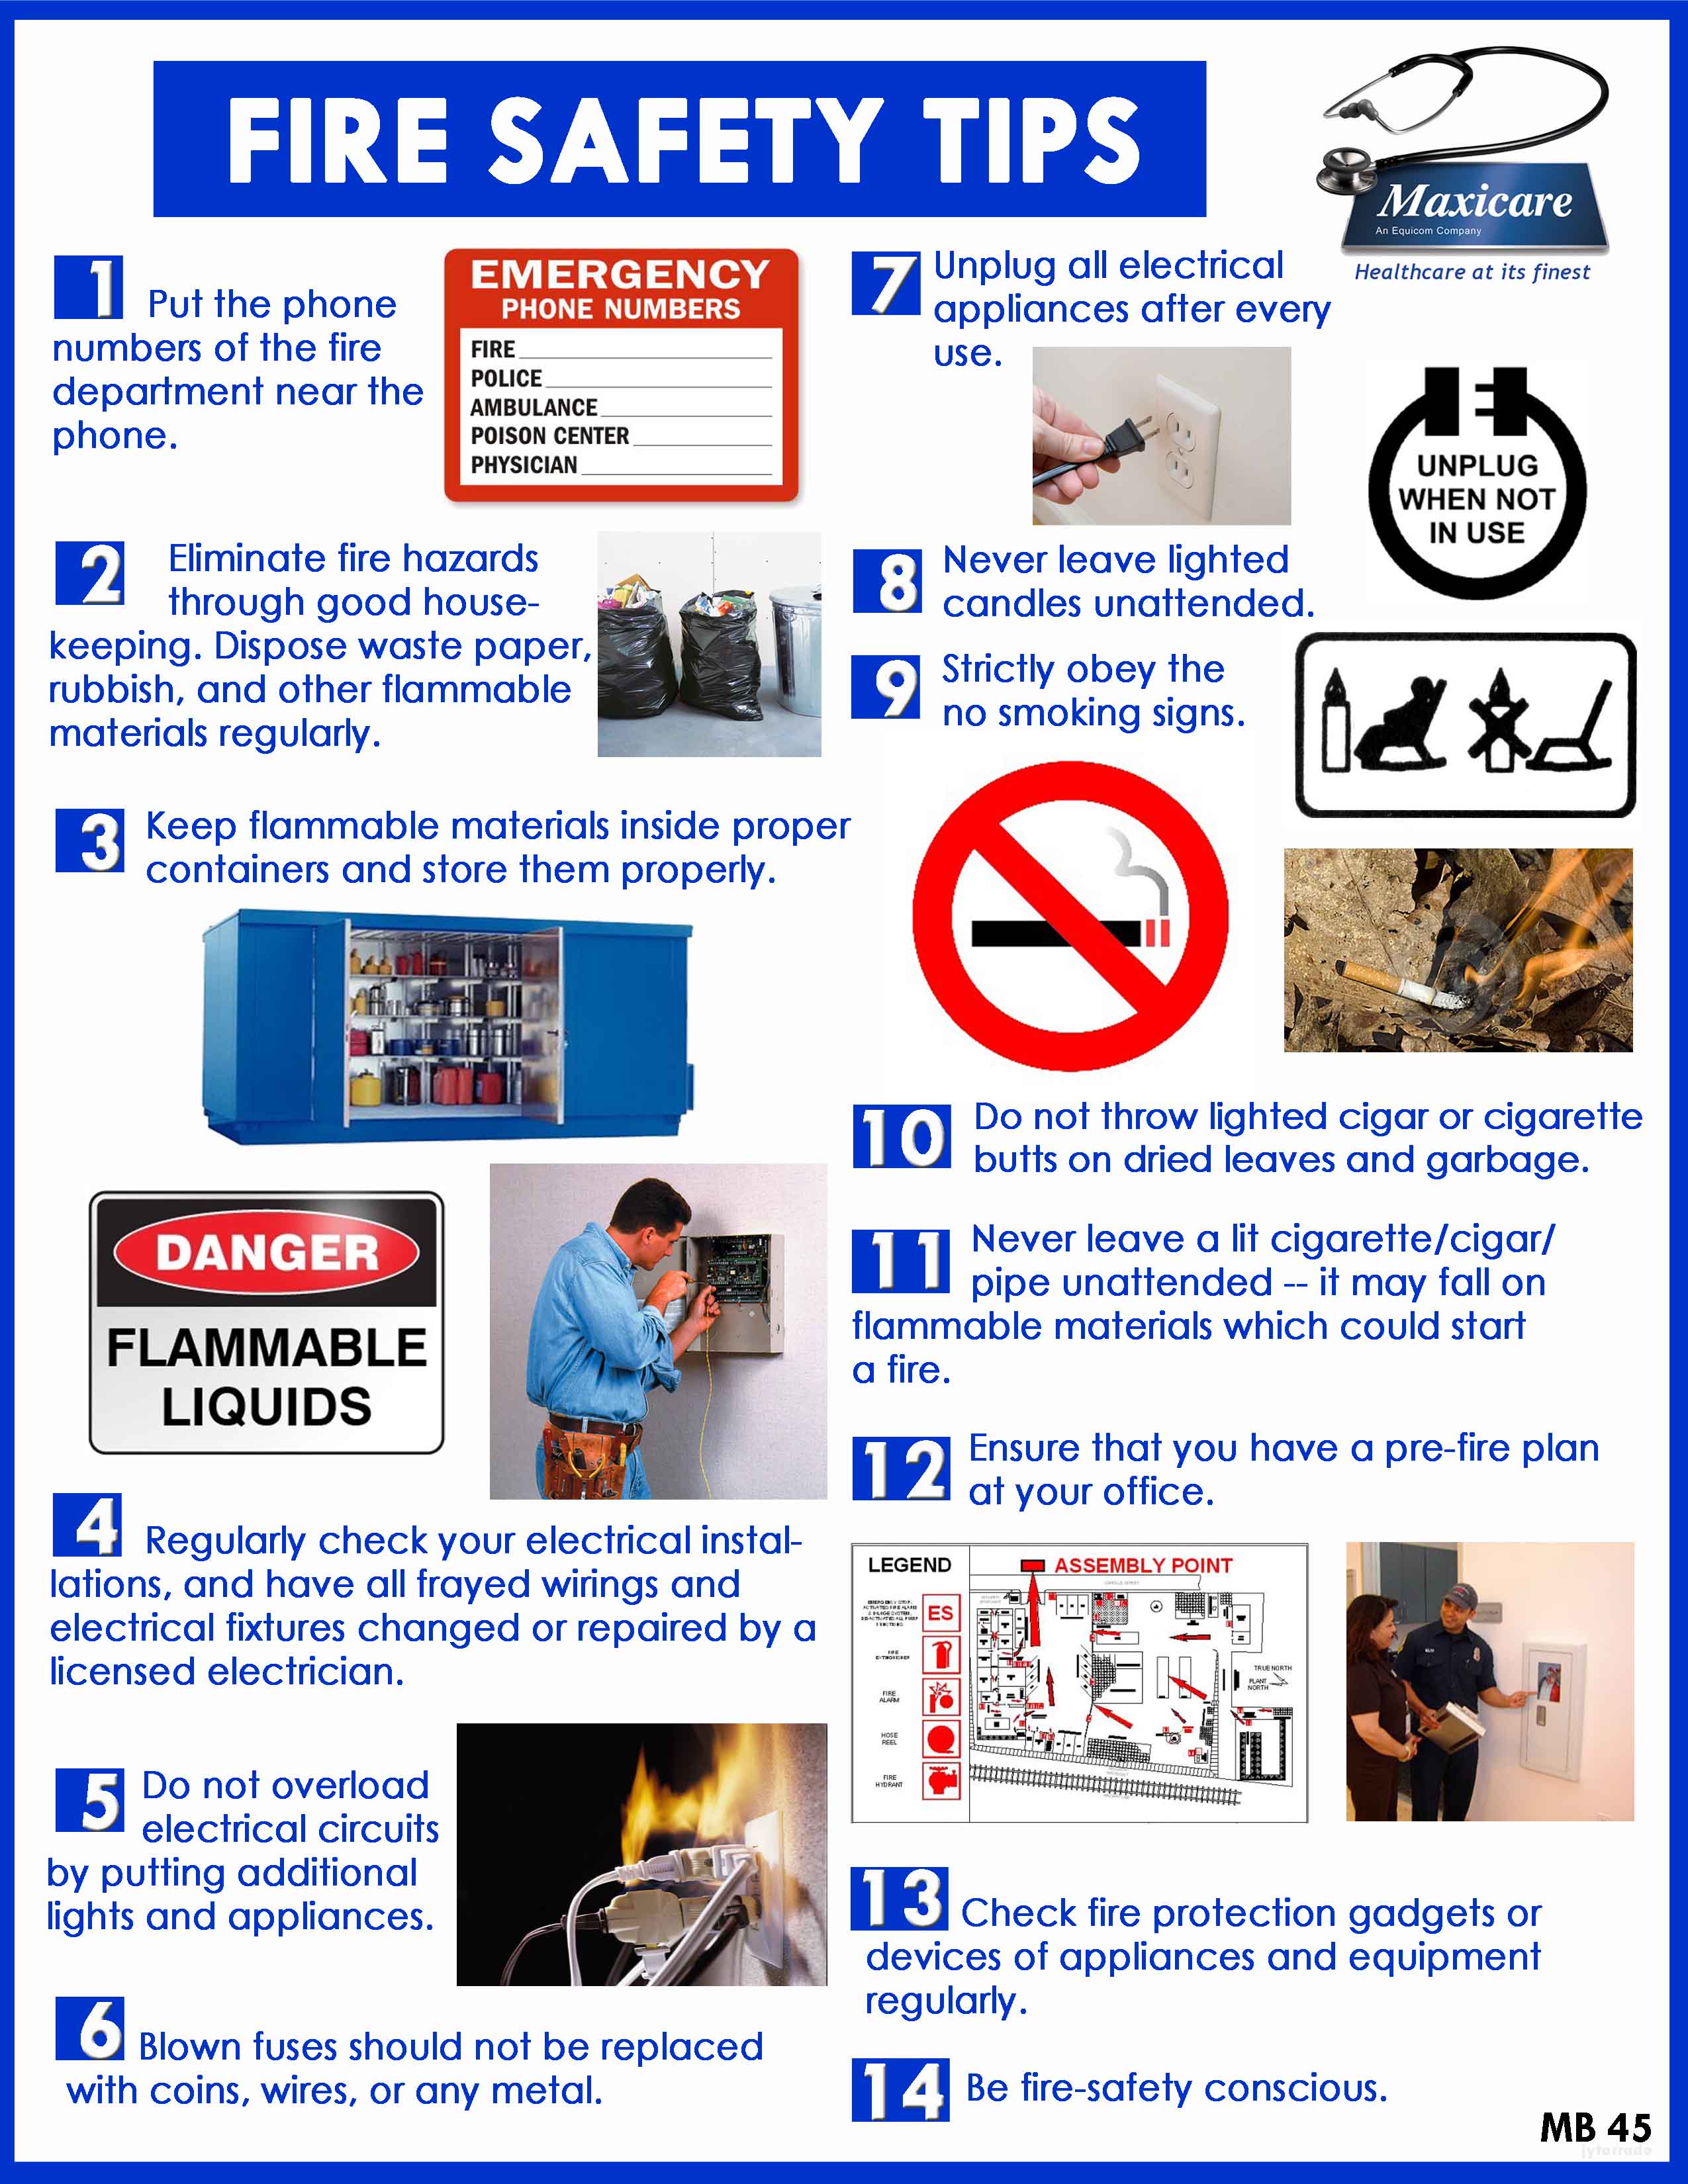 Can You Prevent a Fire? Do’s & Don’ts – Close Range Safety Tips